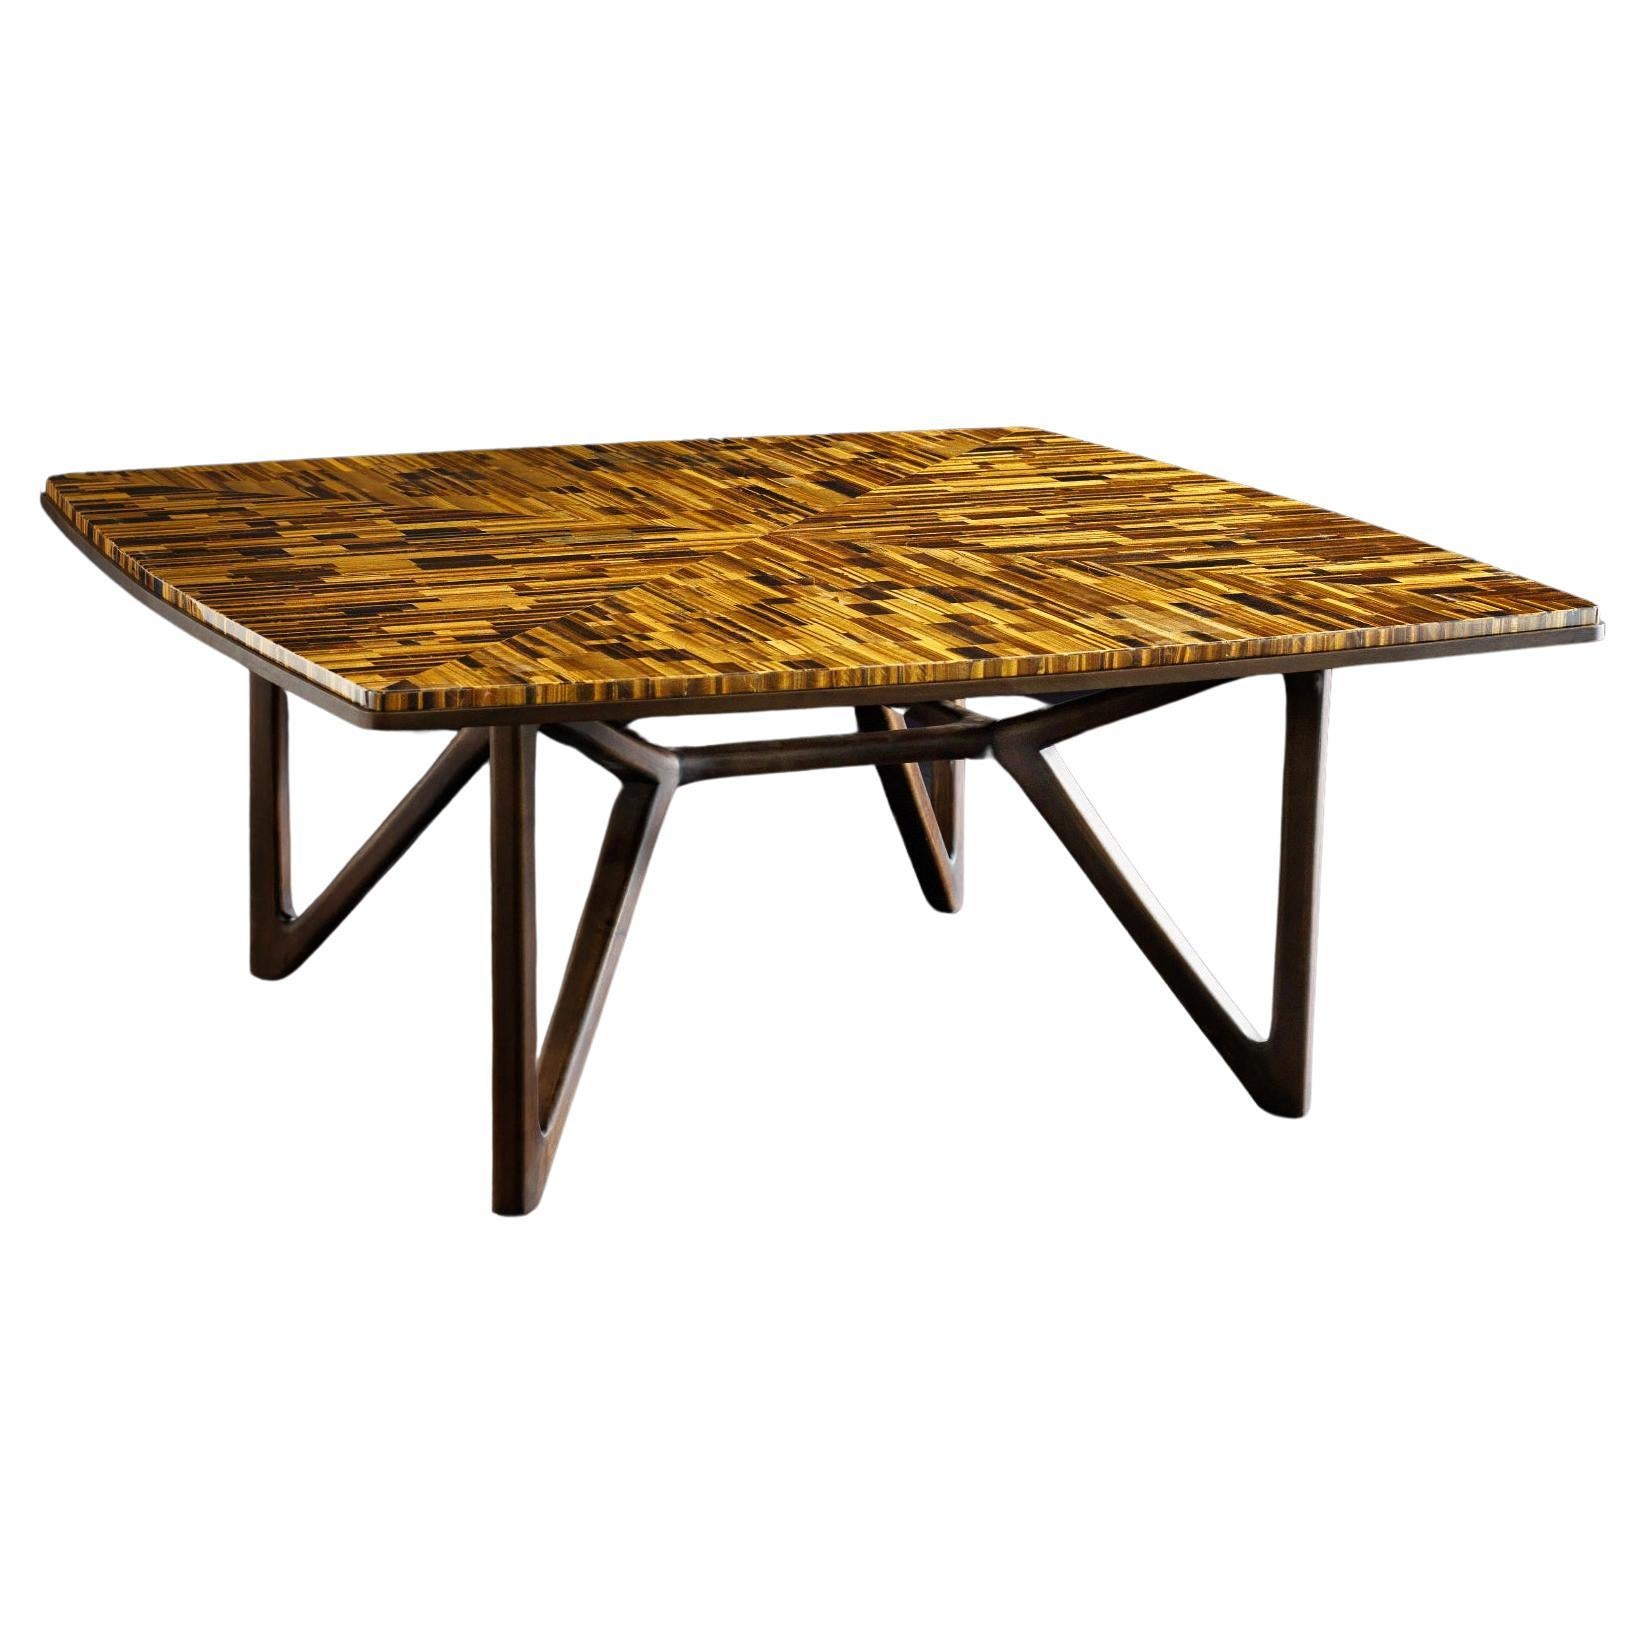 Luxury Table, semiprecious stone and wood - Tiger's eye Stone and wood structure For Sale